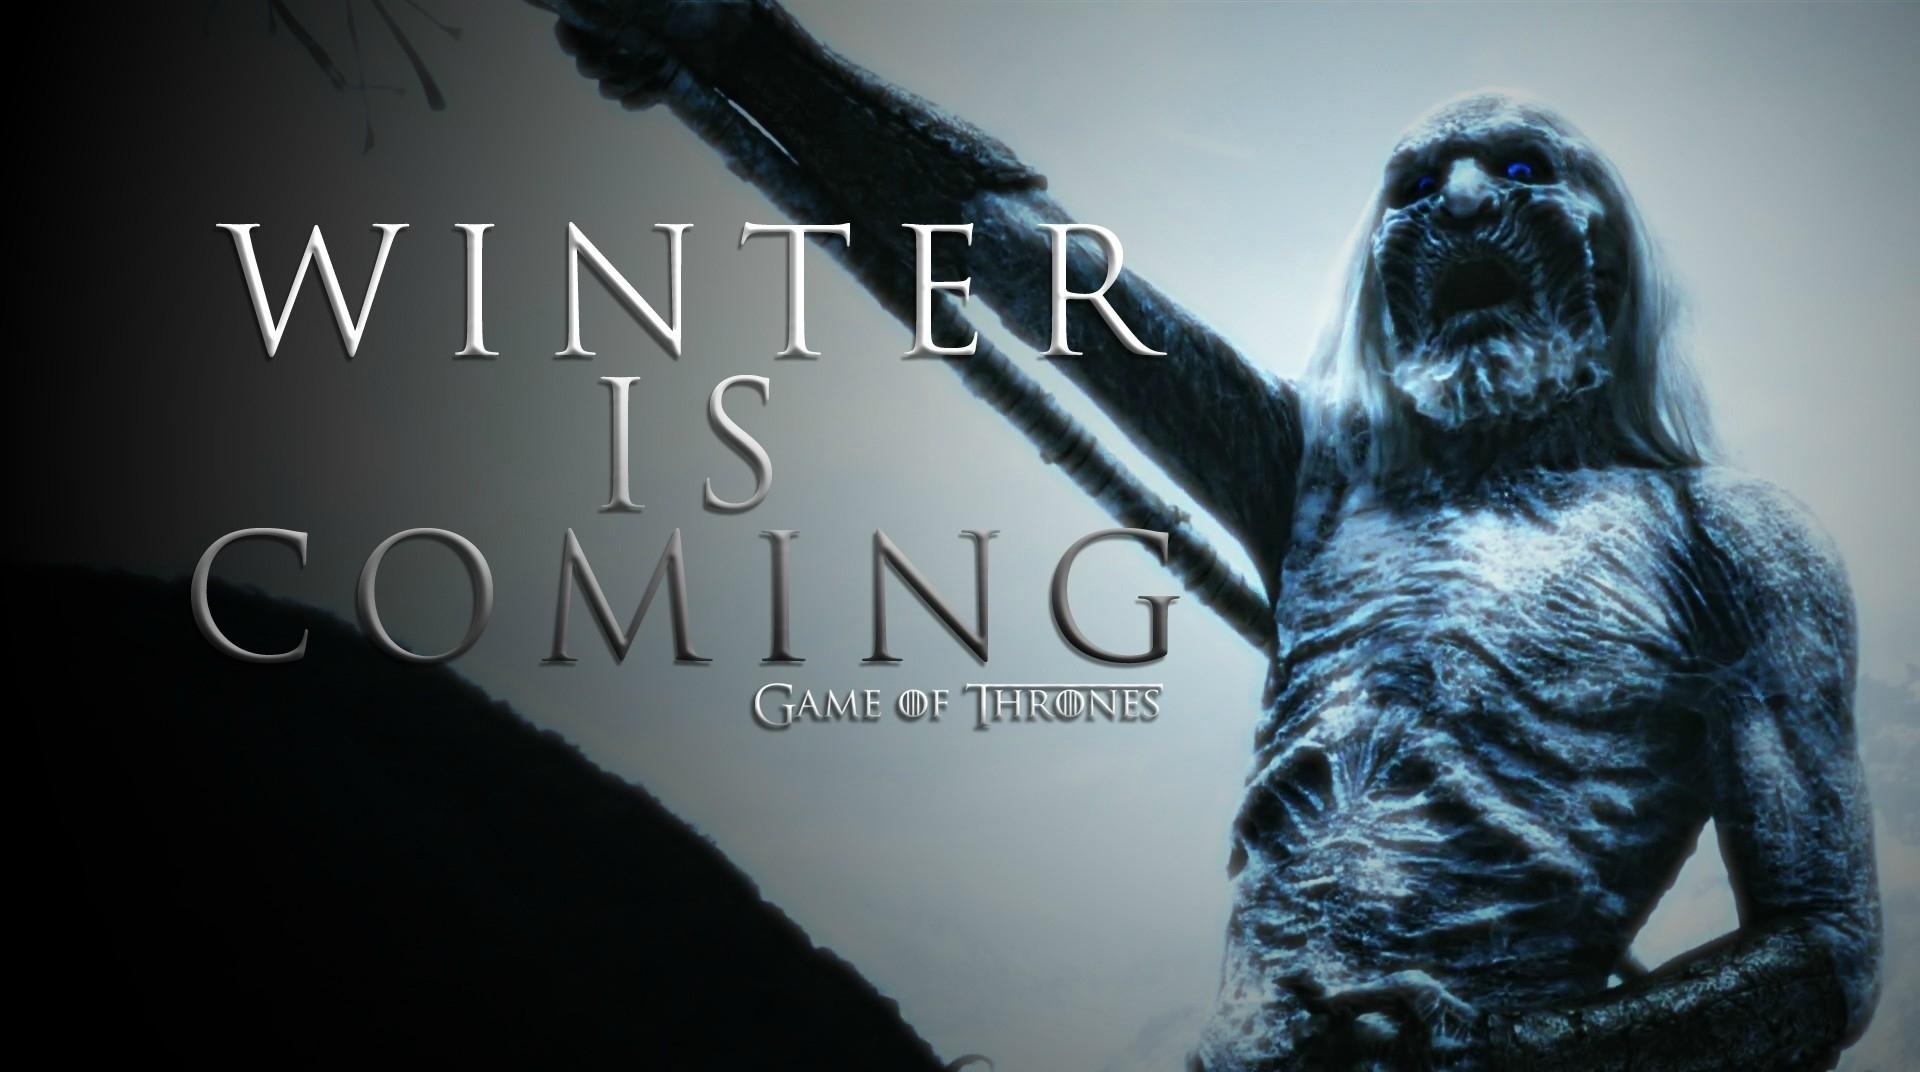 Game of thrones winter is coming house stark Wallpaper free desktop background and wallpaper